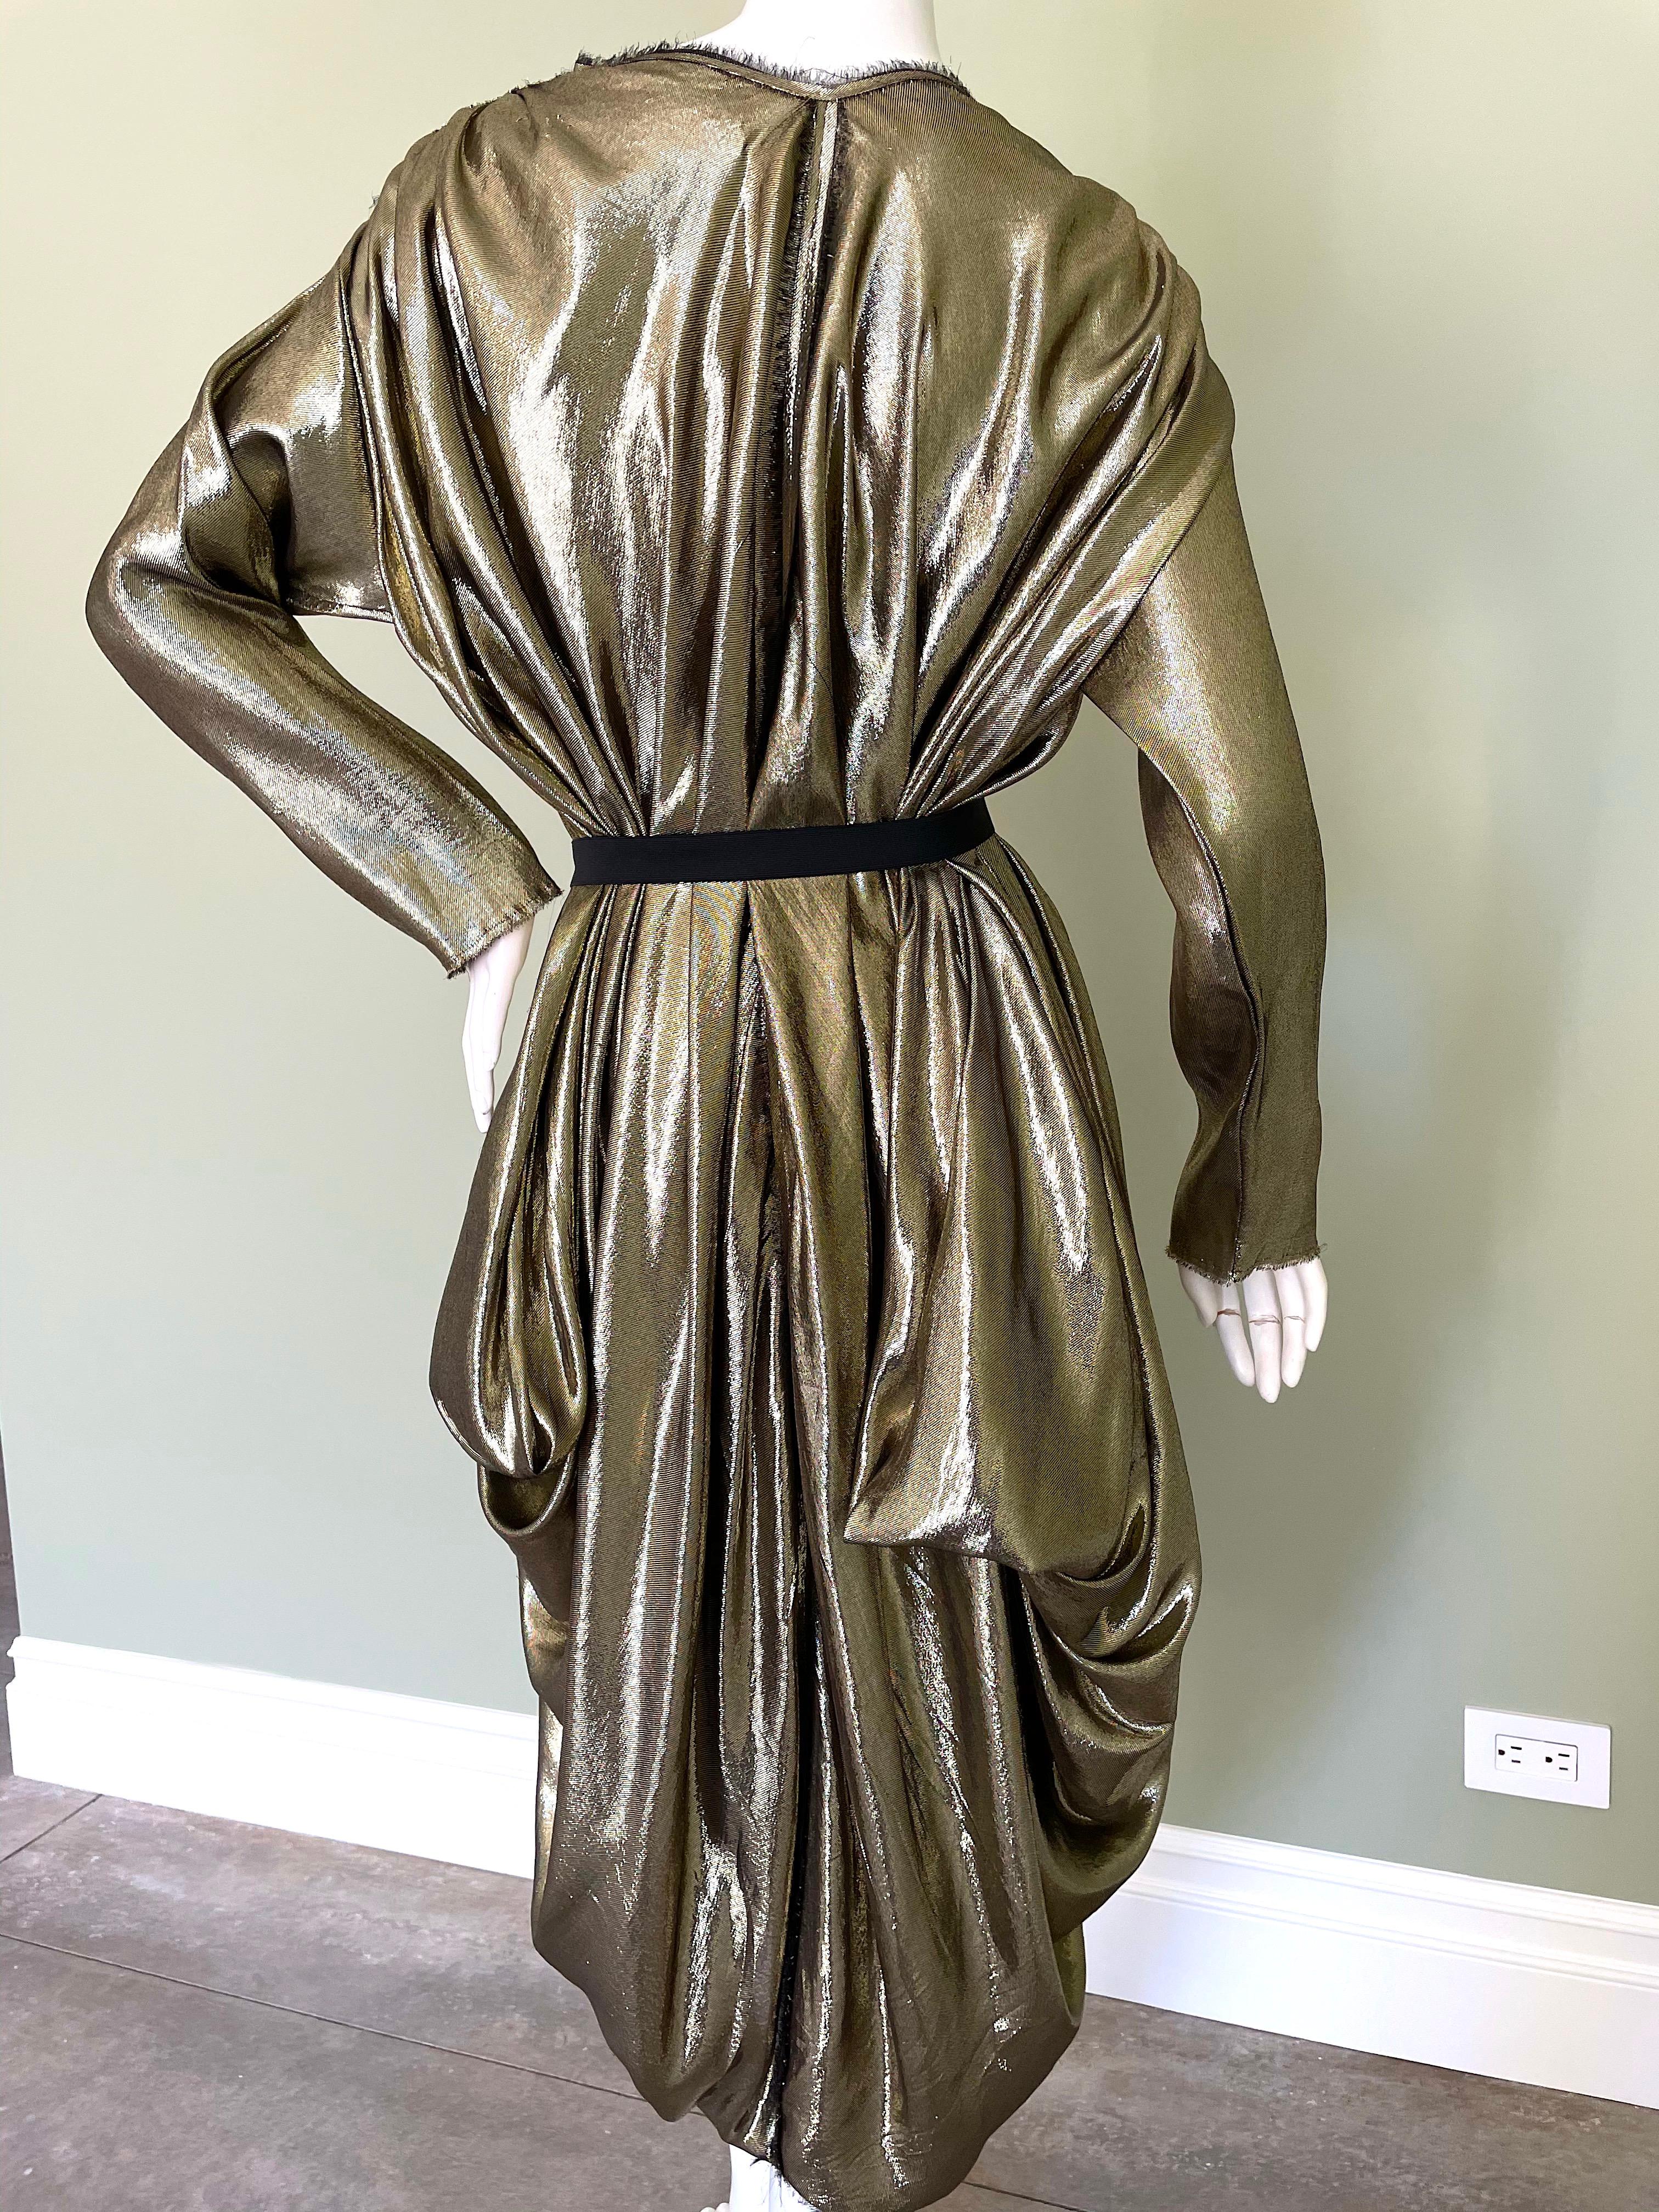 Lanvin by Alber Elbaz Metallic Gold Goddess Dress Spring 2009 In Good Condition For Sale In Cloverdale, CA